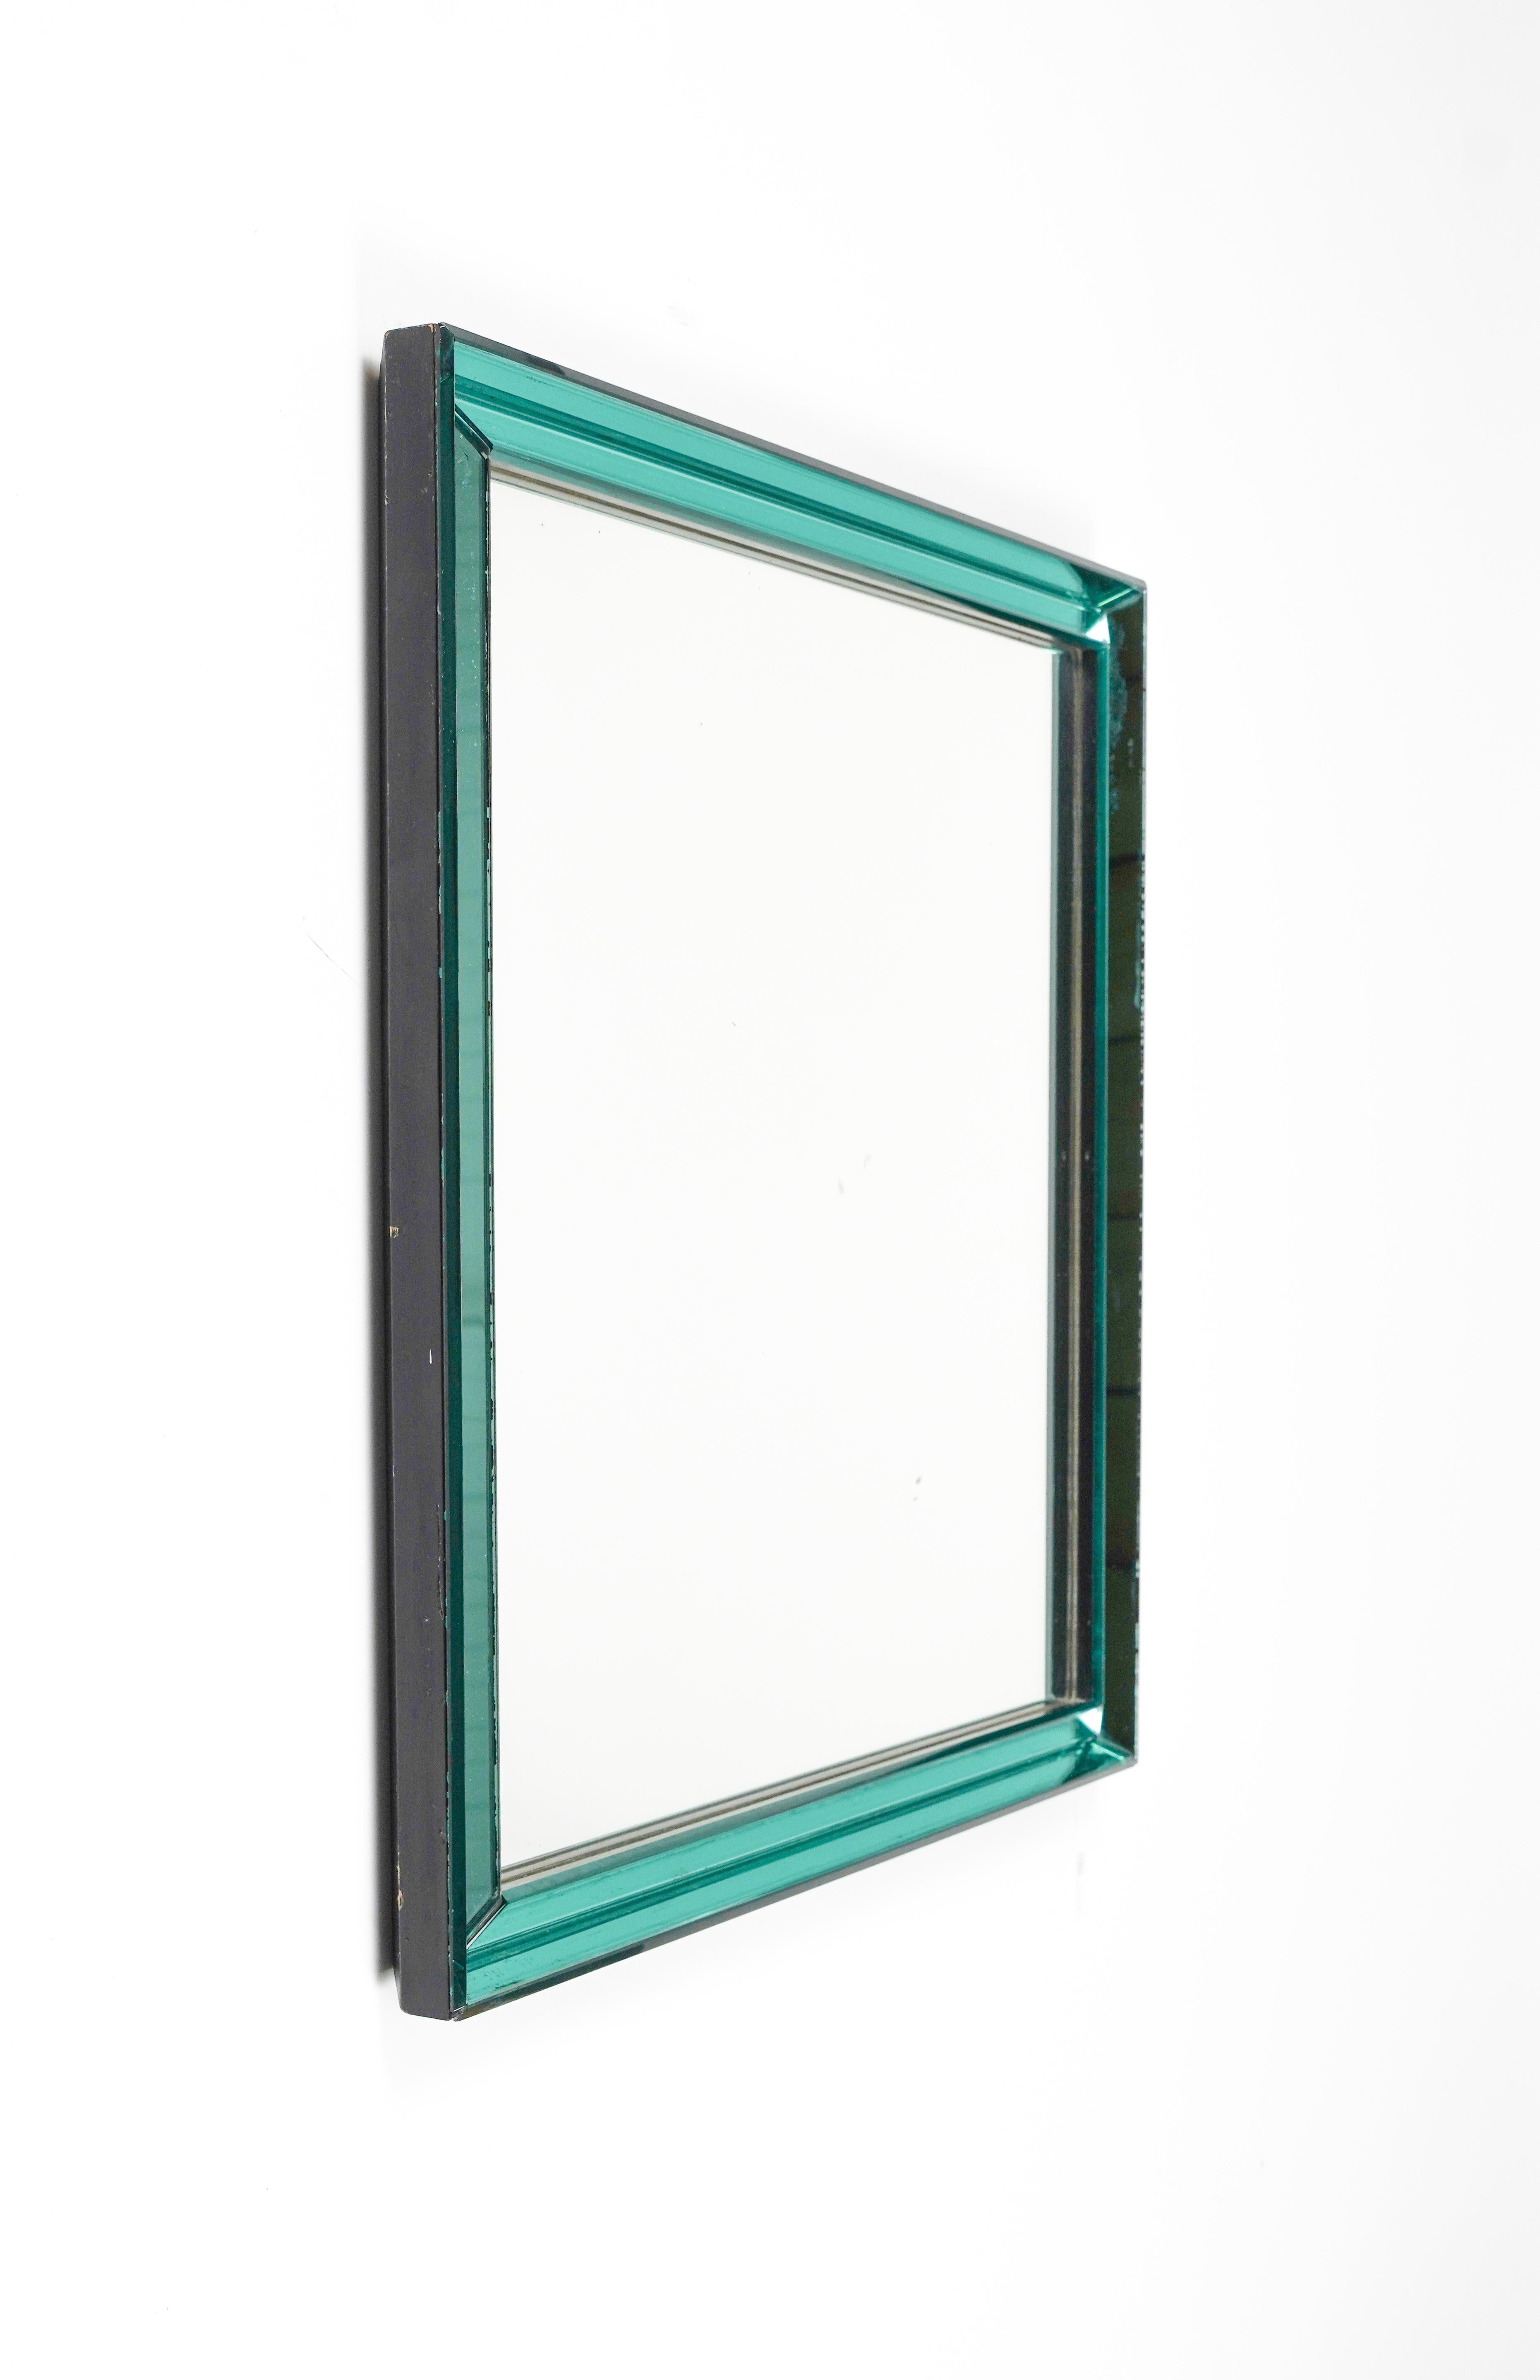 Midcentury Squared Wall Mirror by Max Ingrand for Fontana Arte, Italy 1960s For Sale 5